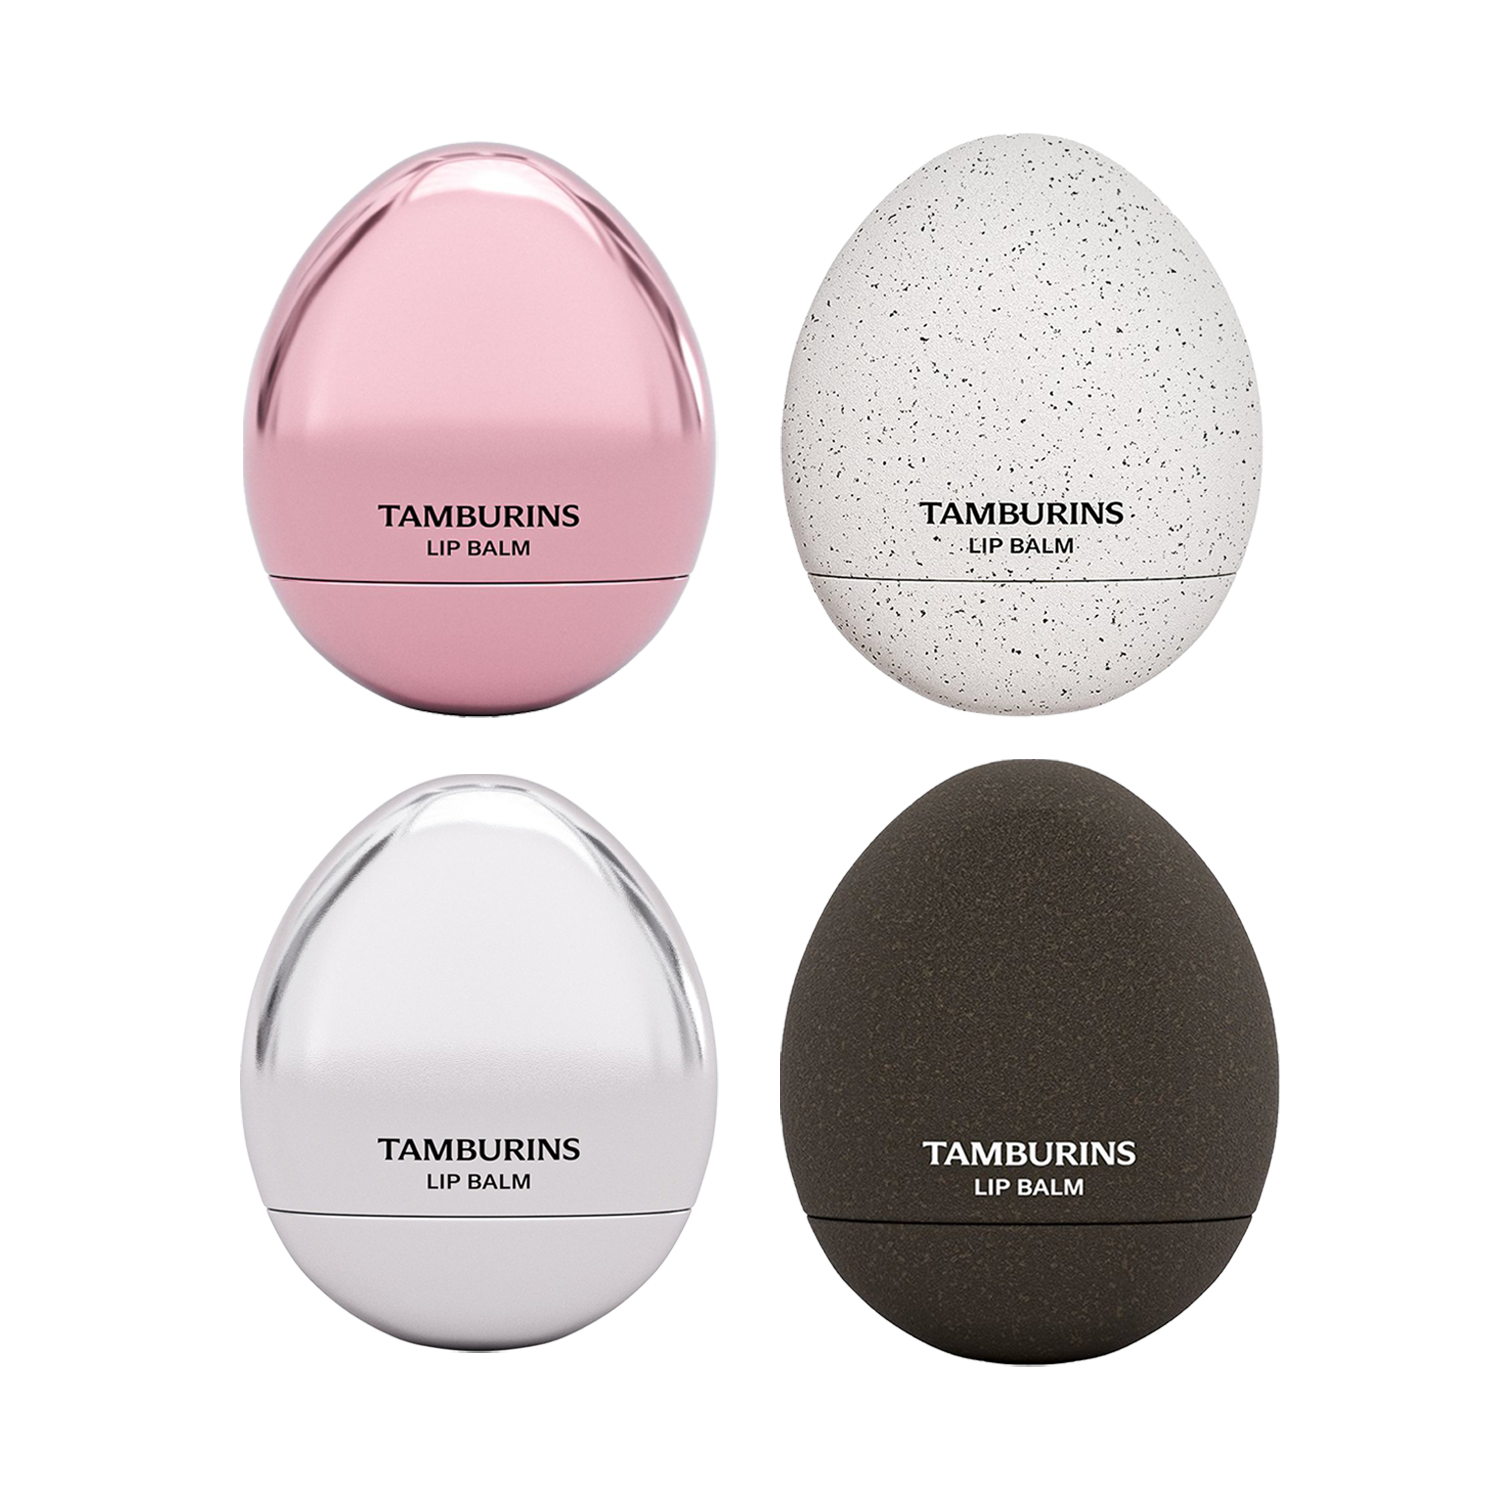 TAMBURINS Egg Lip Balm with tamarinds, a beauty blender, and 4 types of lip balm.